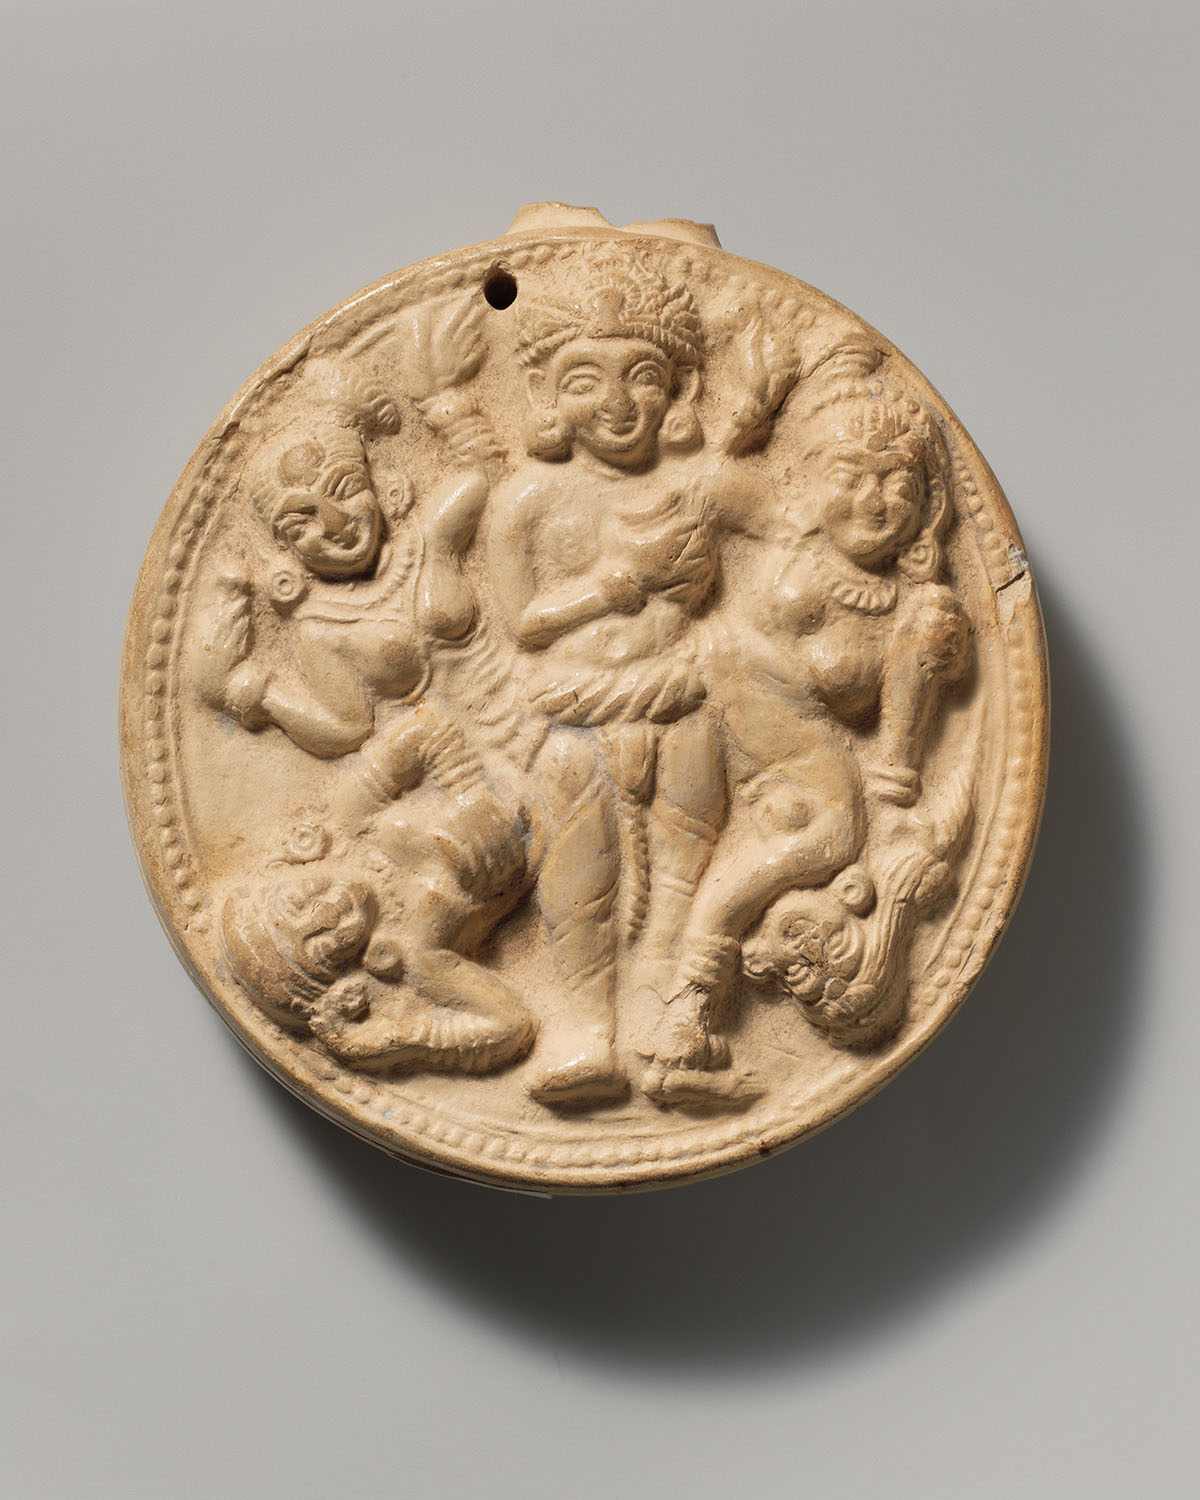 A terracotta figurine holding a small child, accompanied by a parrot.